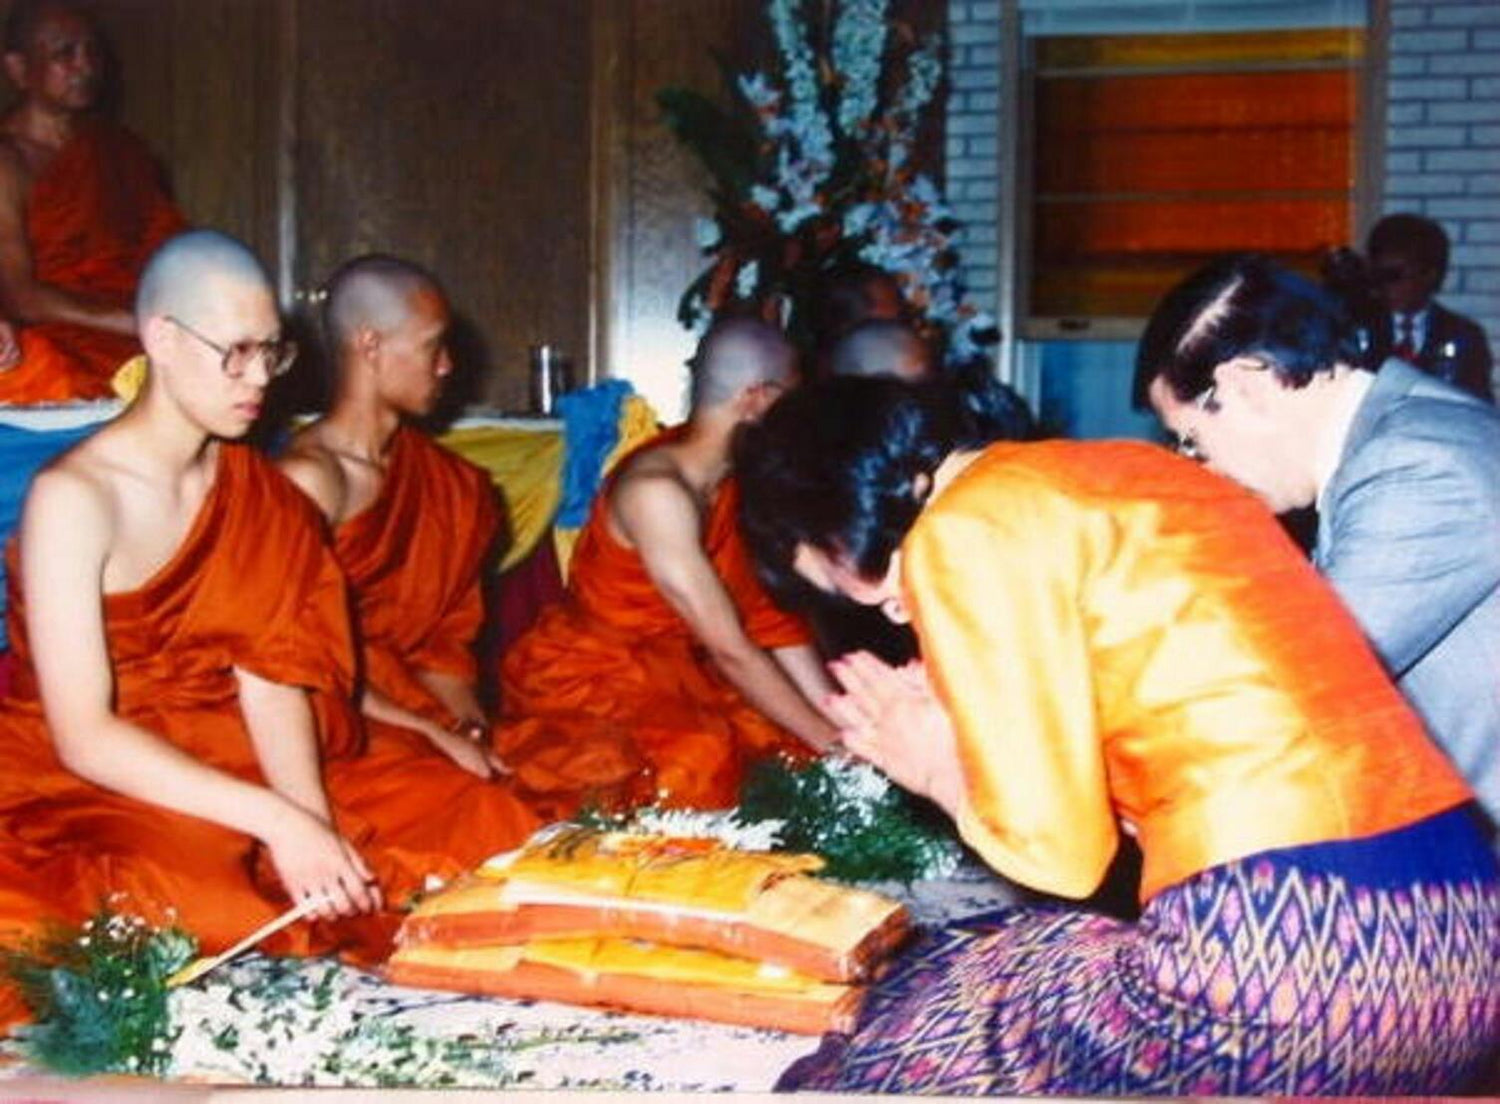 Nat as a monk, pictured on the left 